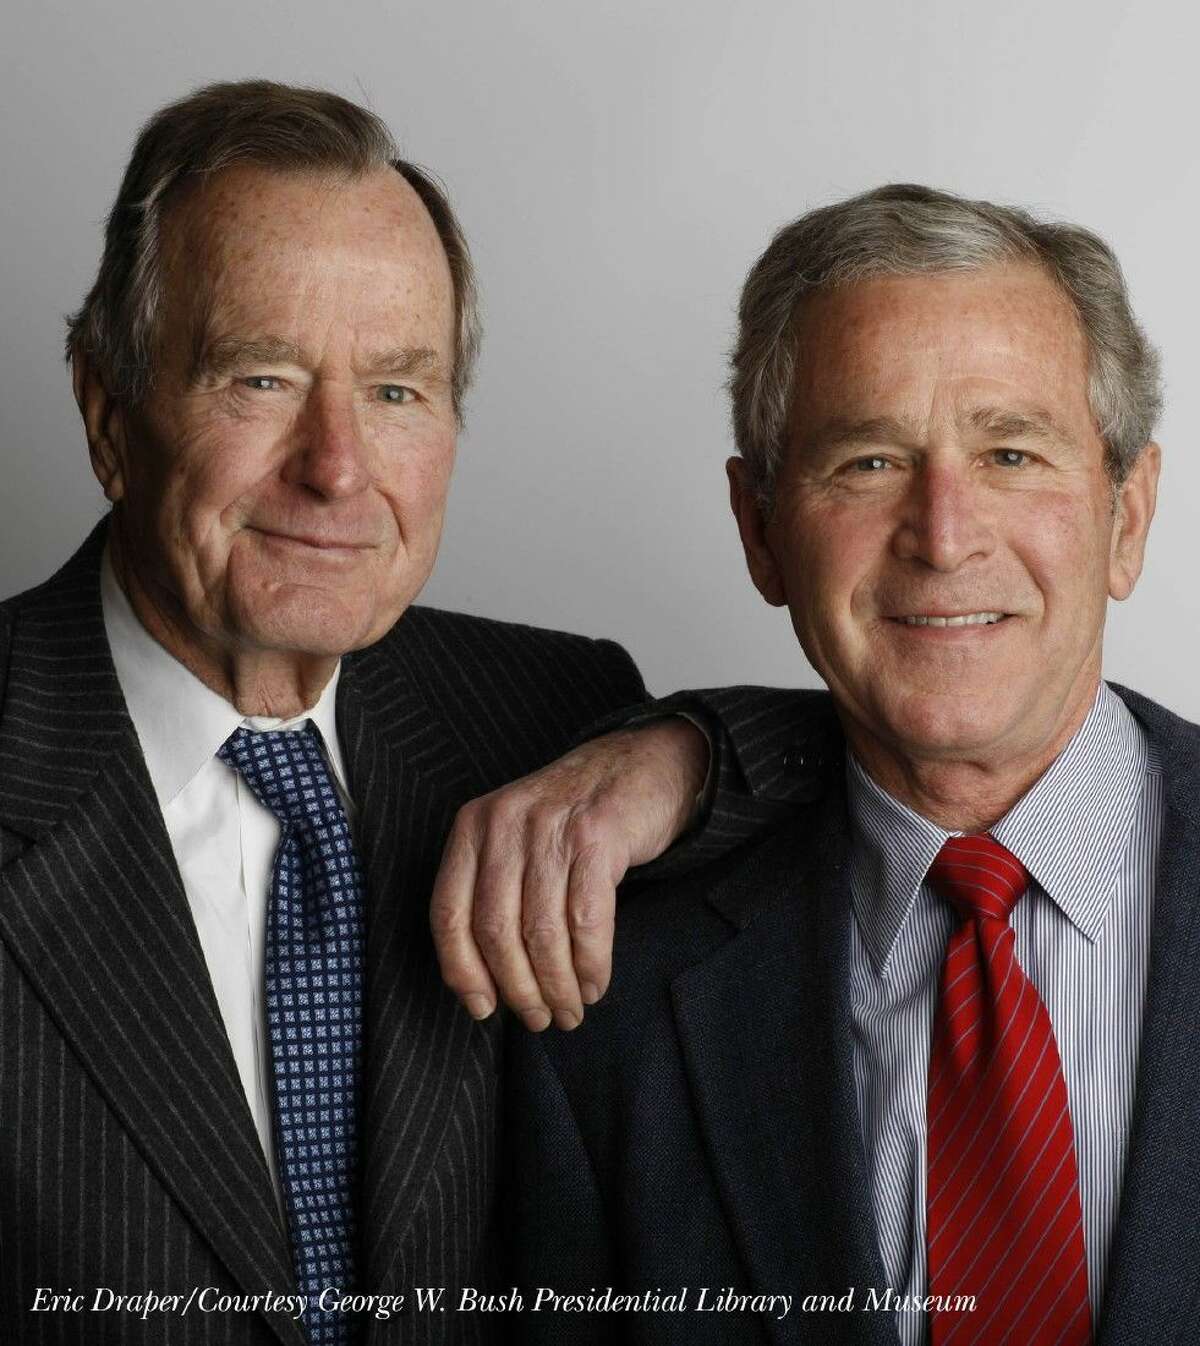 President G.W. Bush to present new biography of his father Nov. 11 in